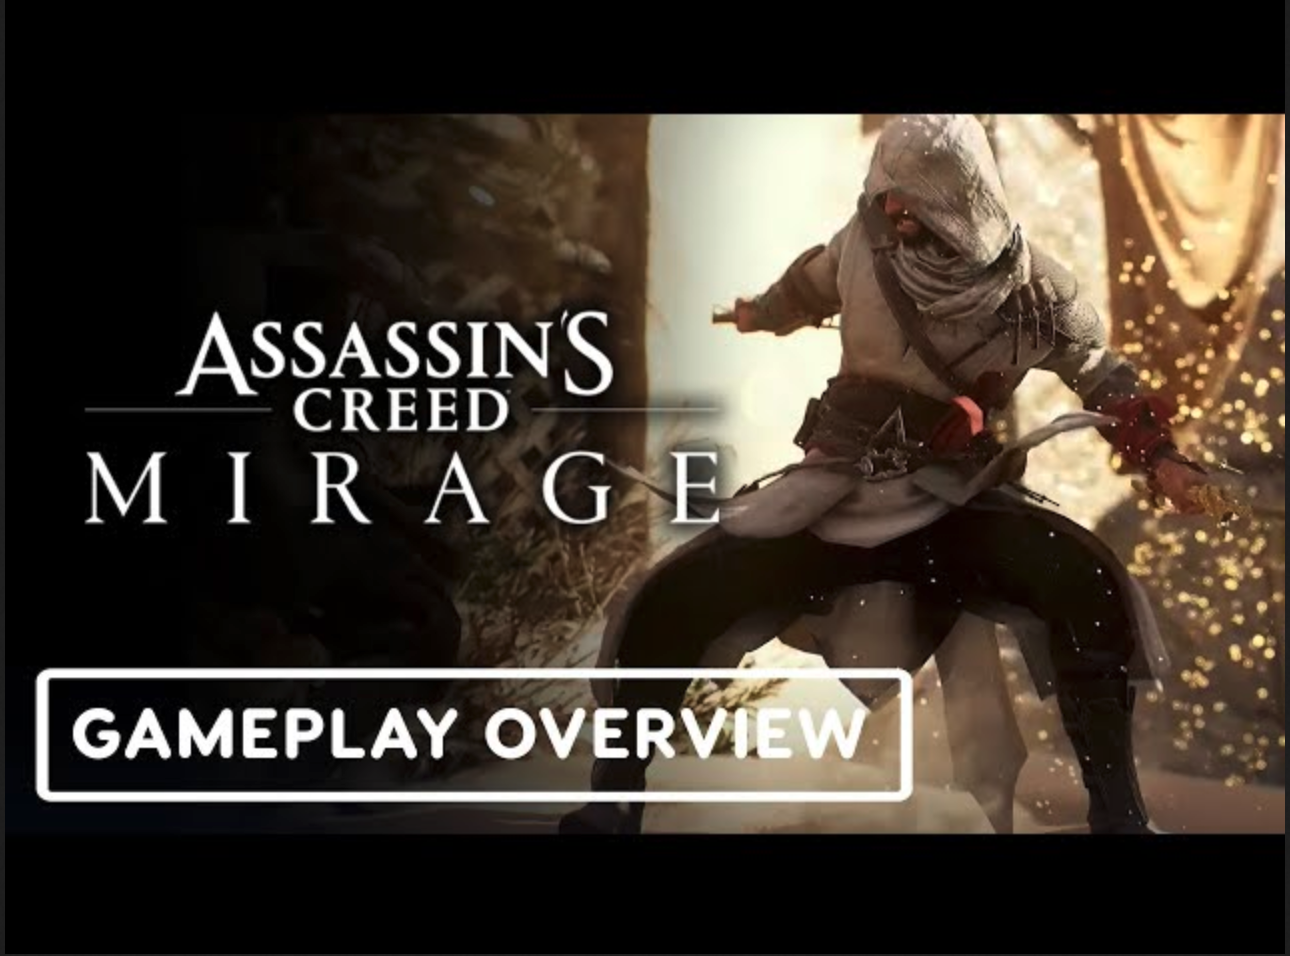 Assassin's Creed Mirage' Release Date Trailer